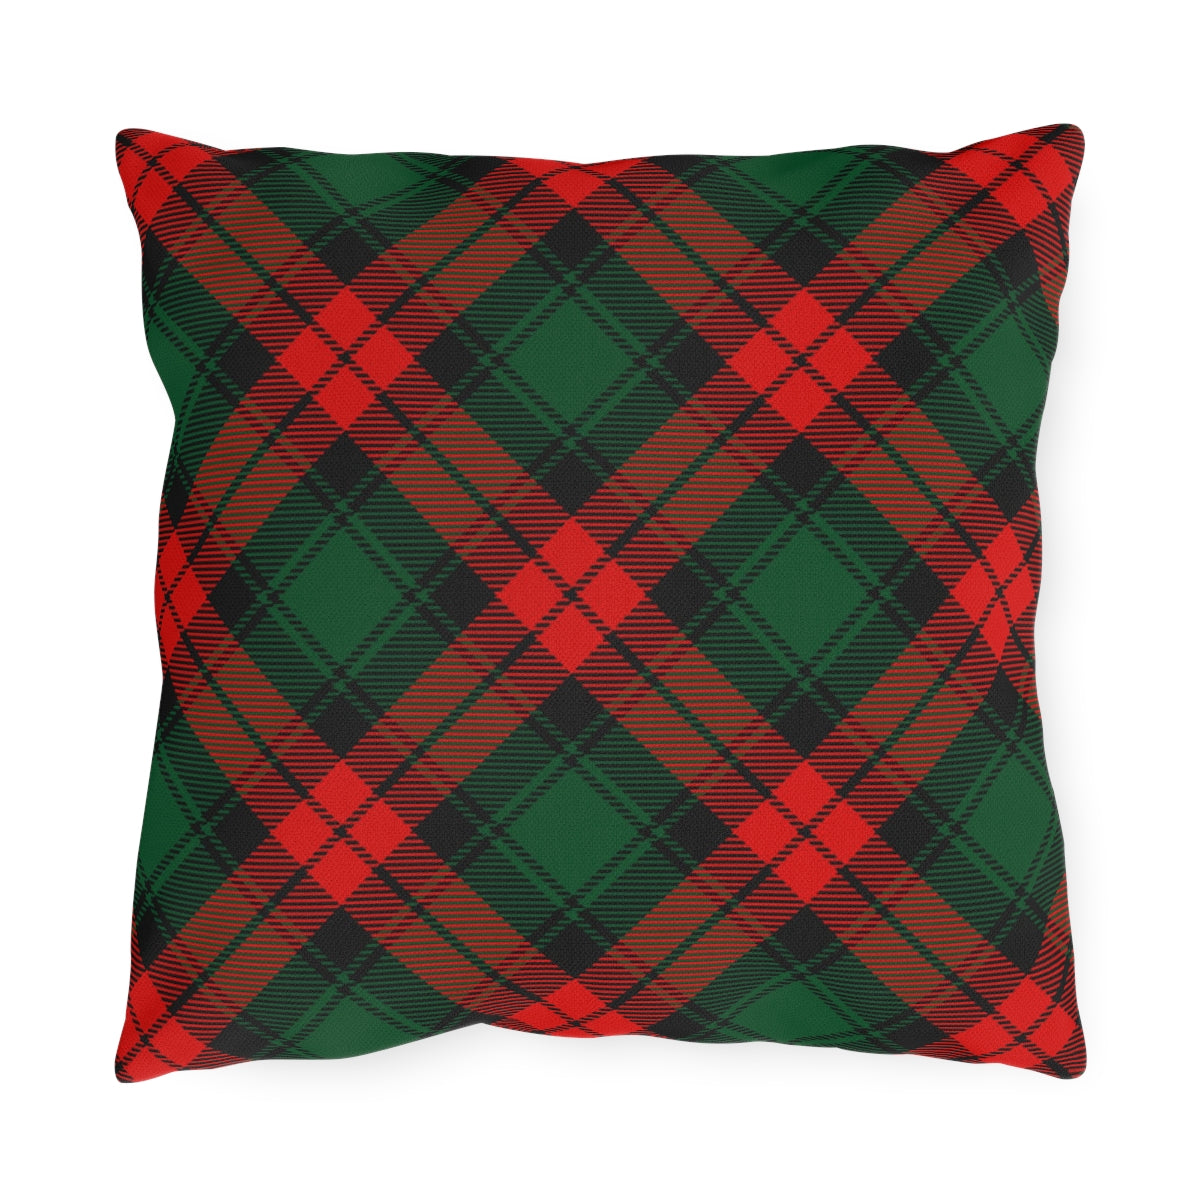 Red and Green Tartan Plaid Outdoor Pillow